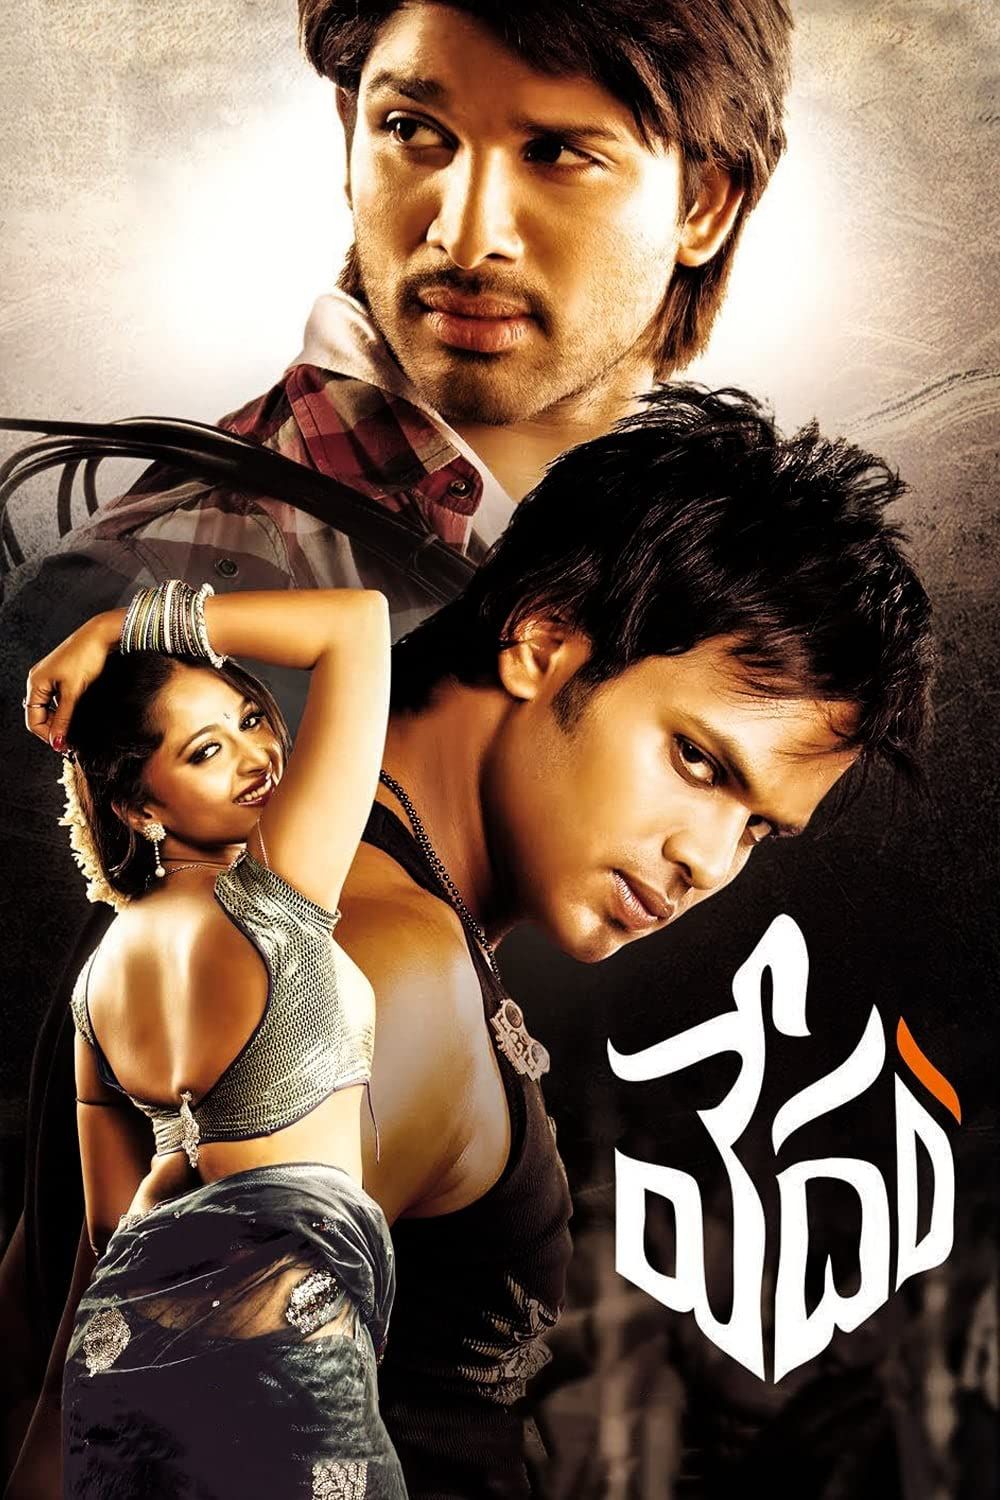 Vedam (2010) Hindi Dubbed BluRay download full movie